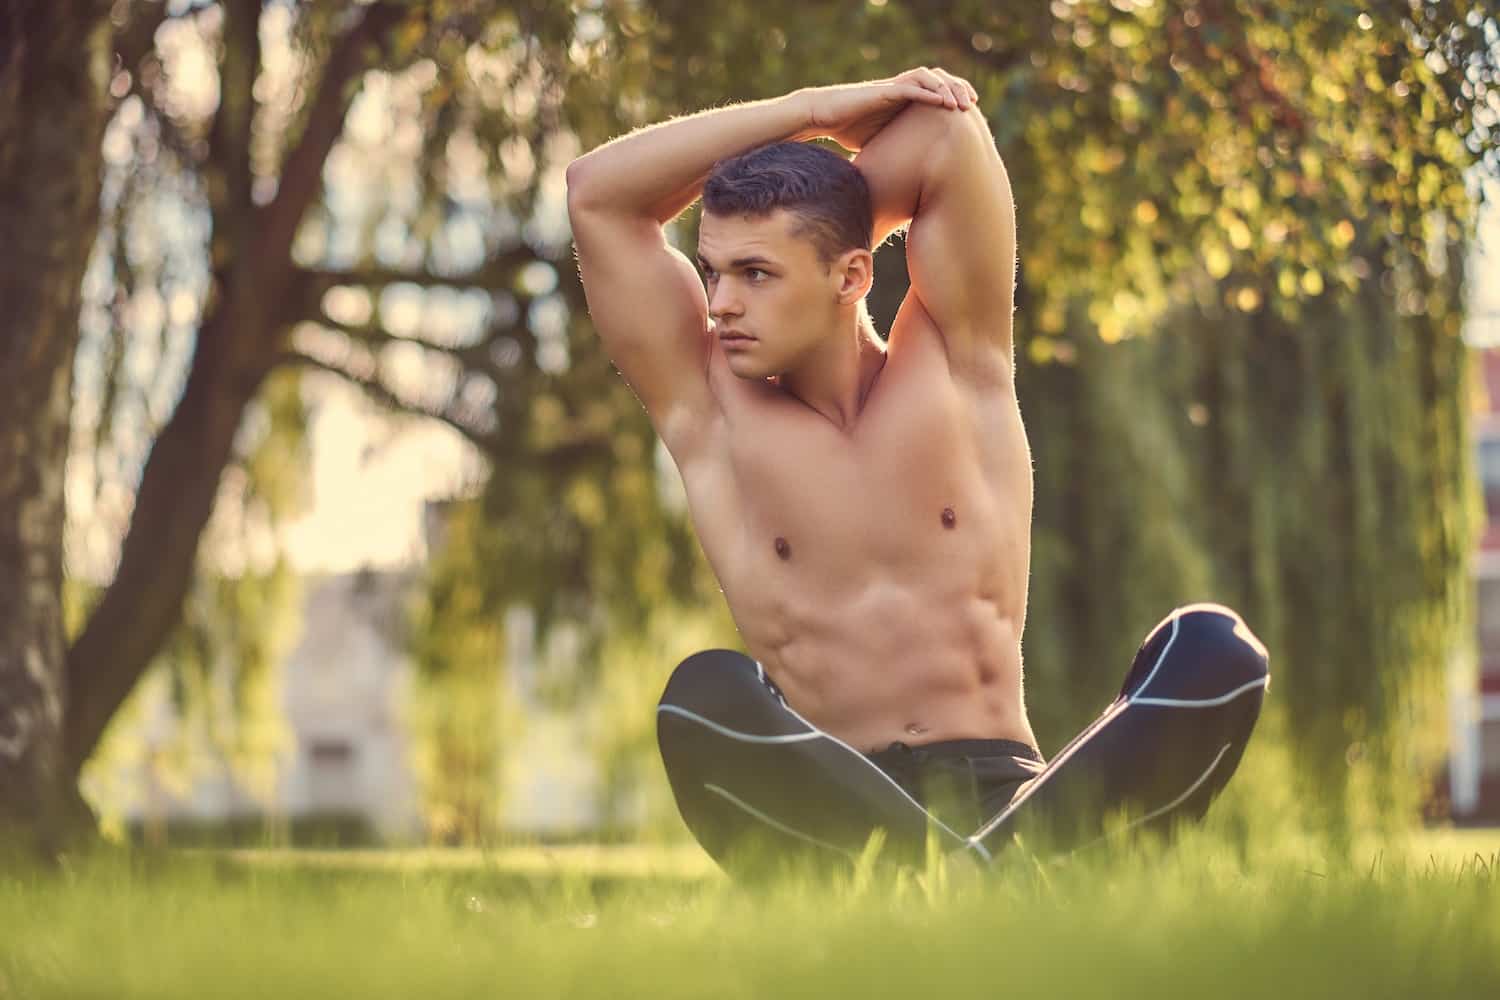 The Best Yoga For Men Poses For Beginners To Try